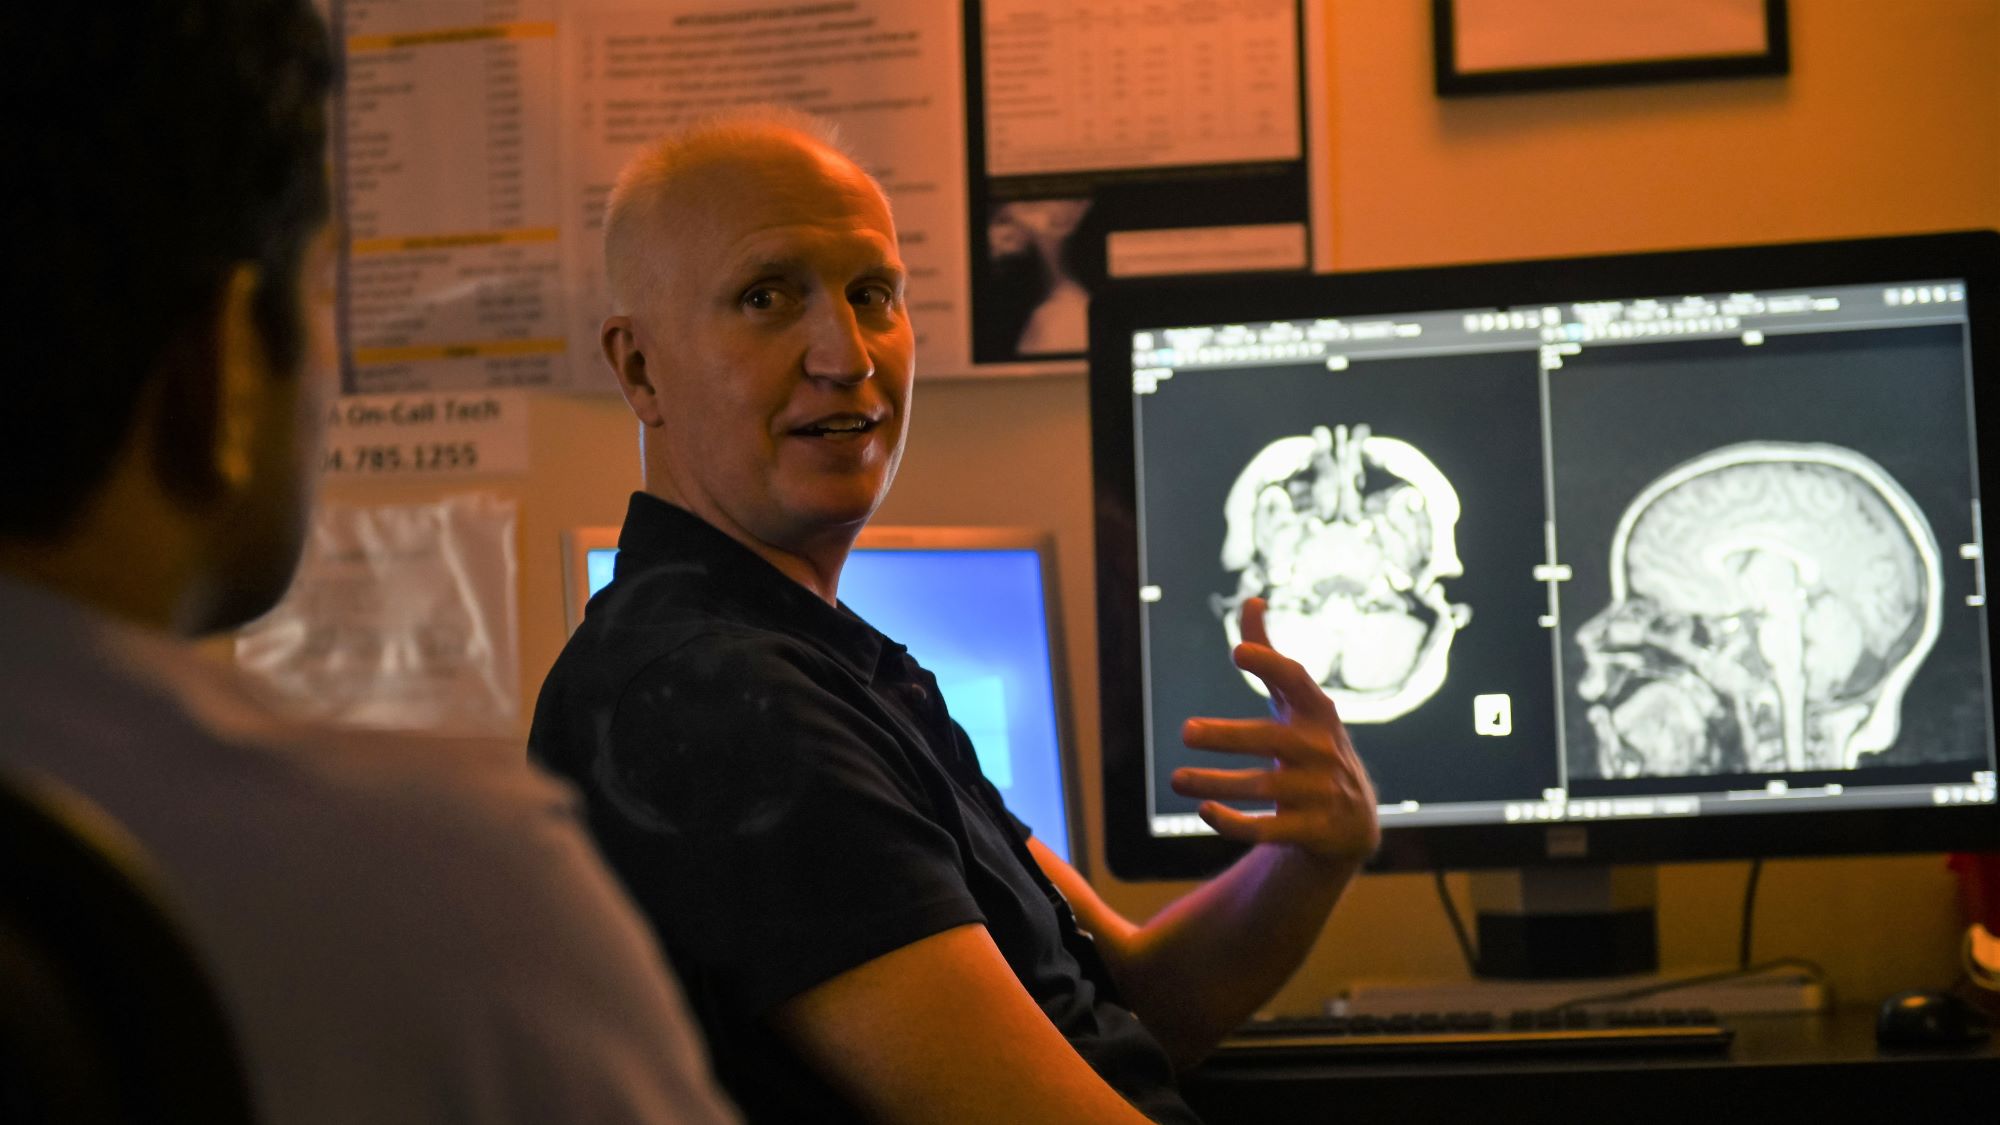 man in darkened room explaining a diagnostic image on the screen behind him